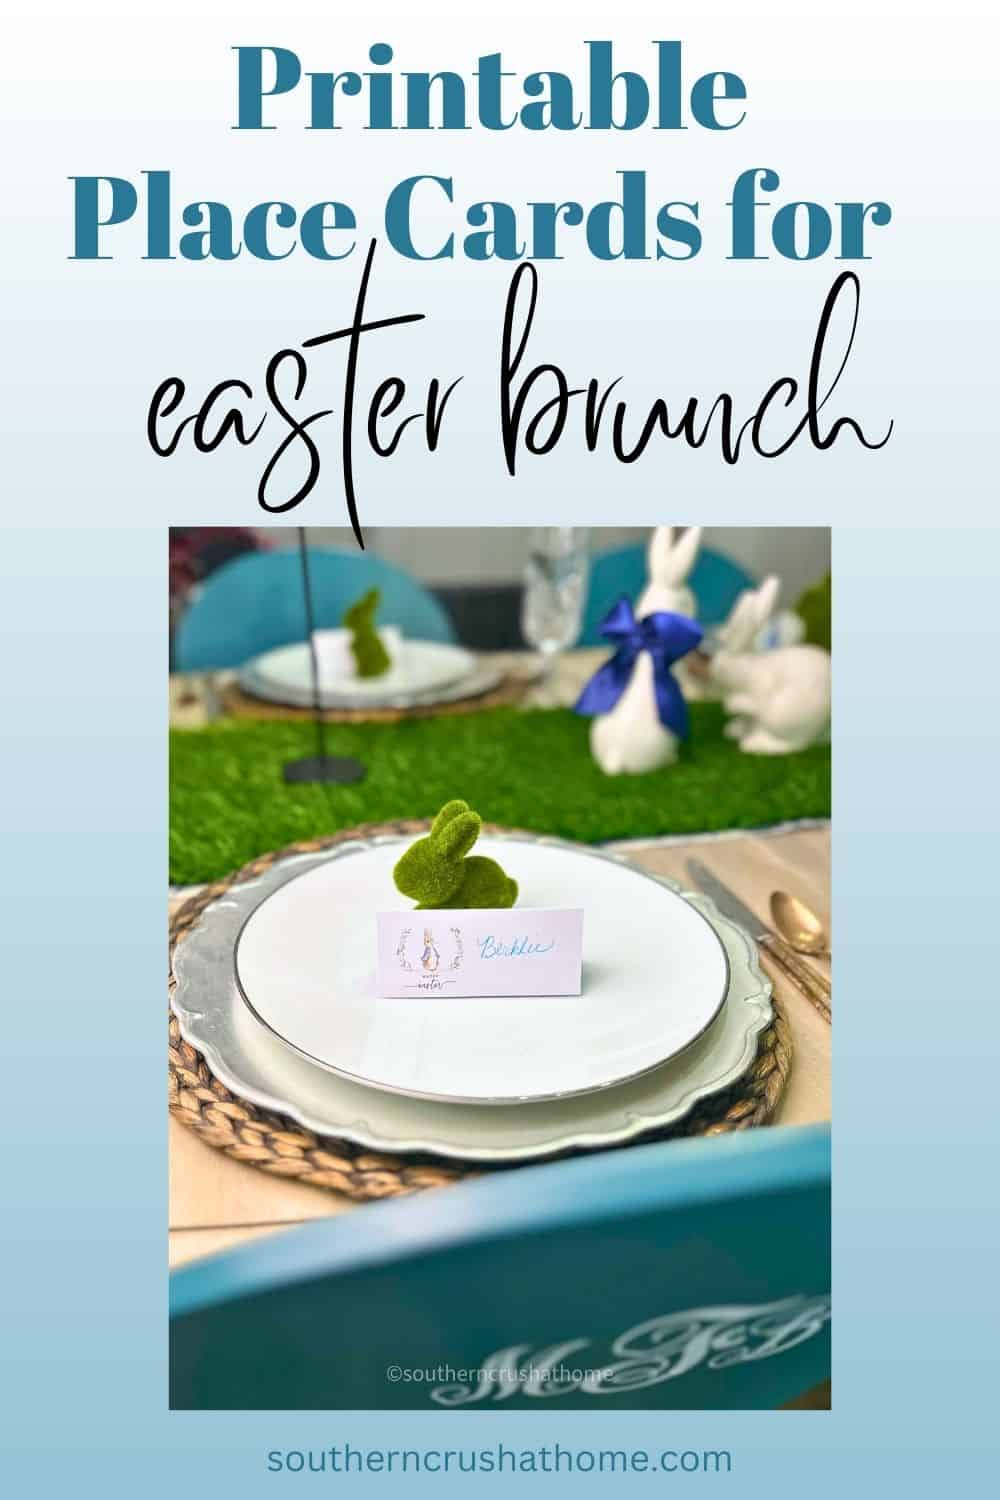 printable place cards for easter brunch PIN